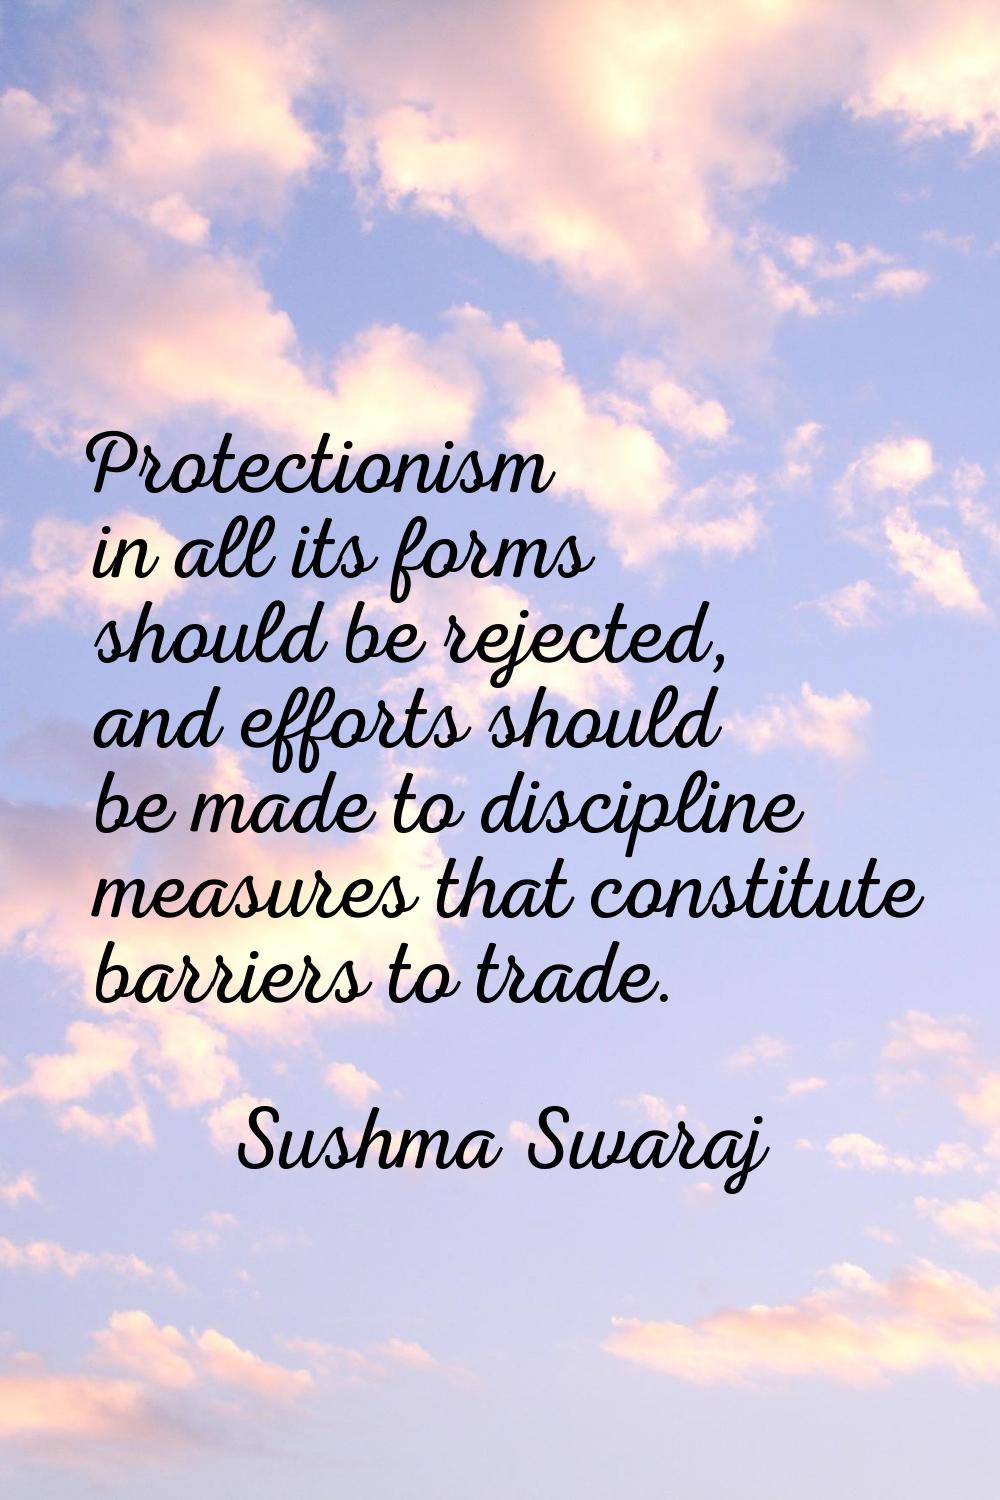 Protectionism in all its forms should be rejected, and efforts should be made to discipline measure